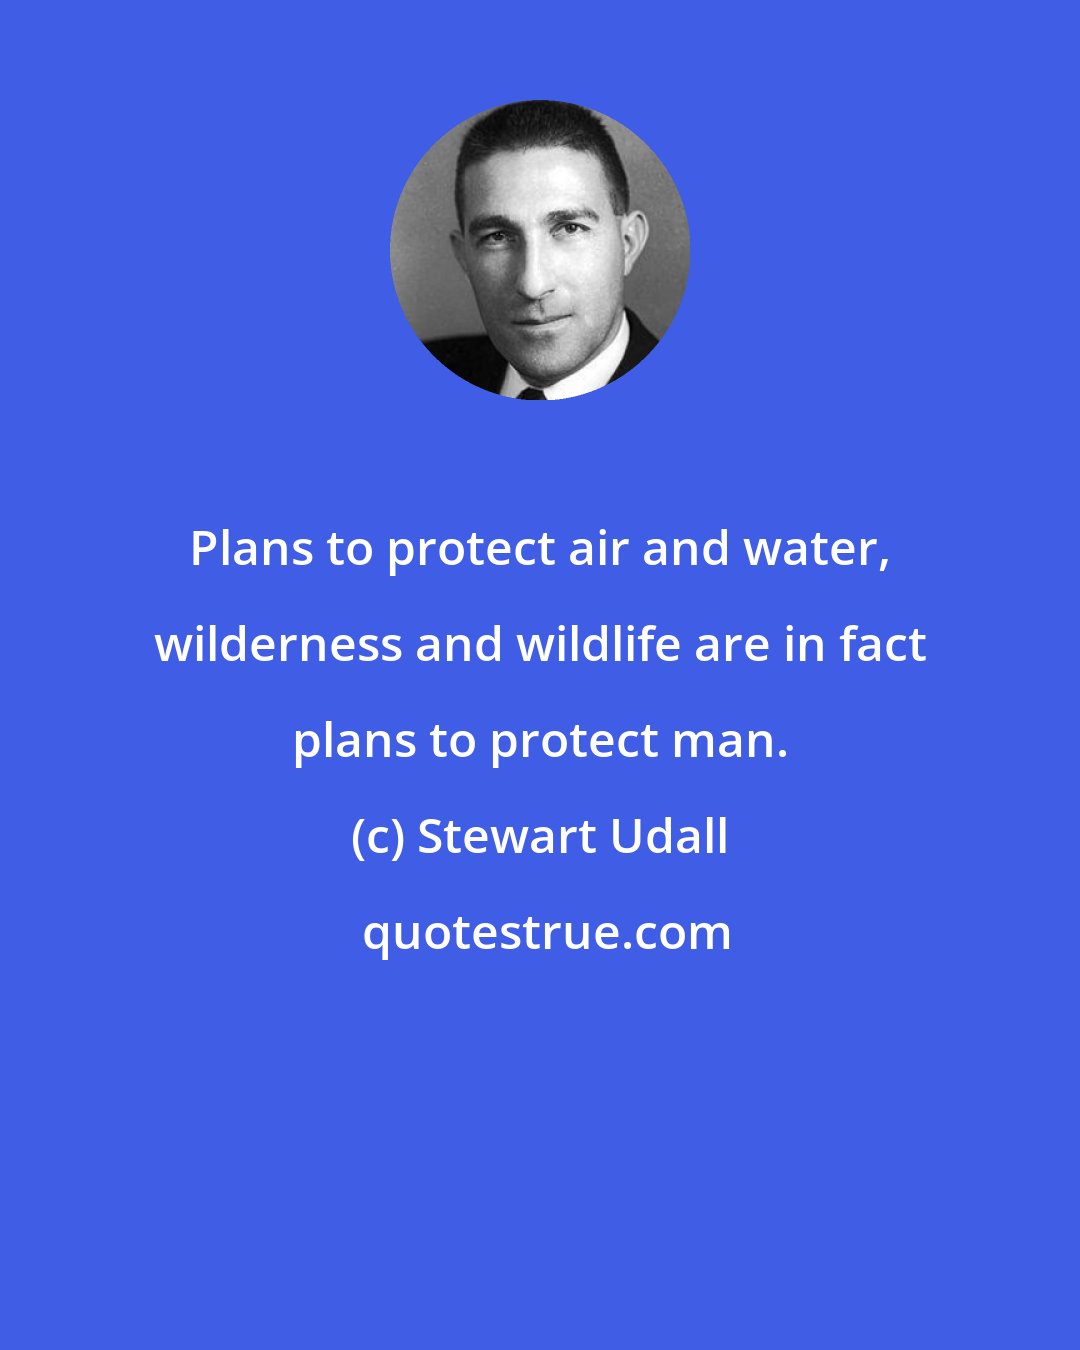 Stewart Udall: Plans to protect air and water, wilderness and wildlife are in fact plans to protect man.